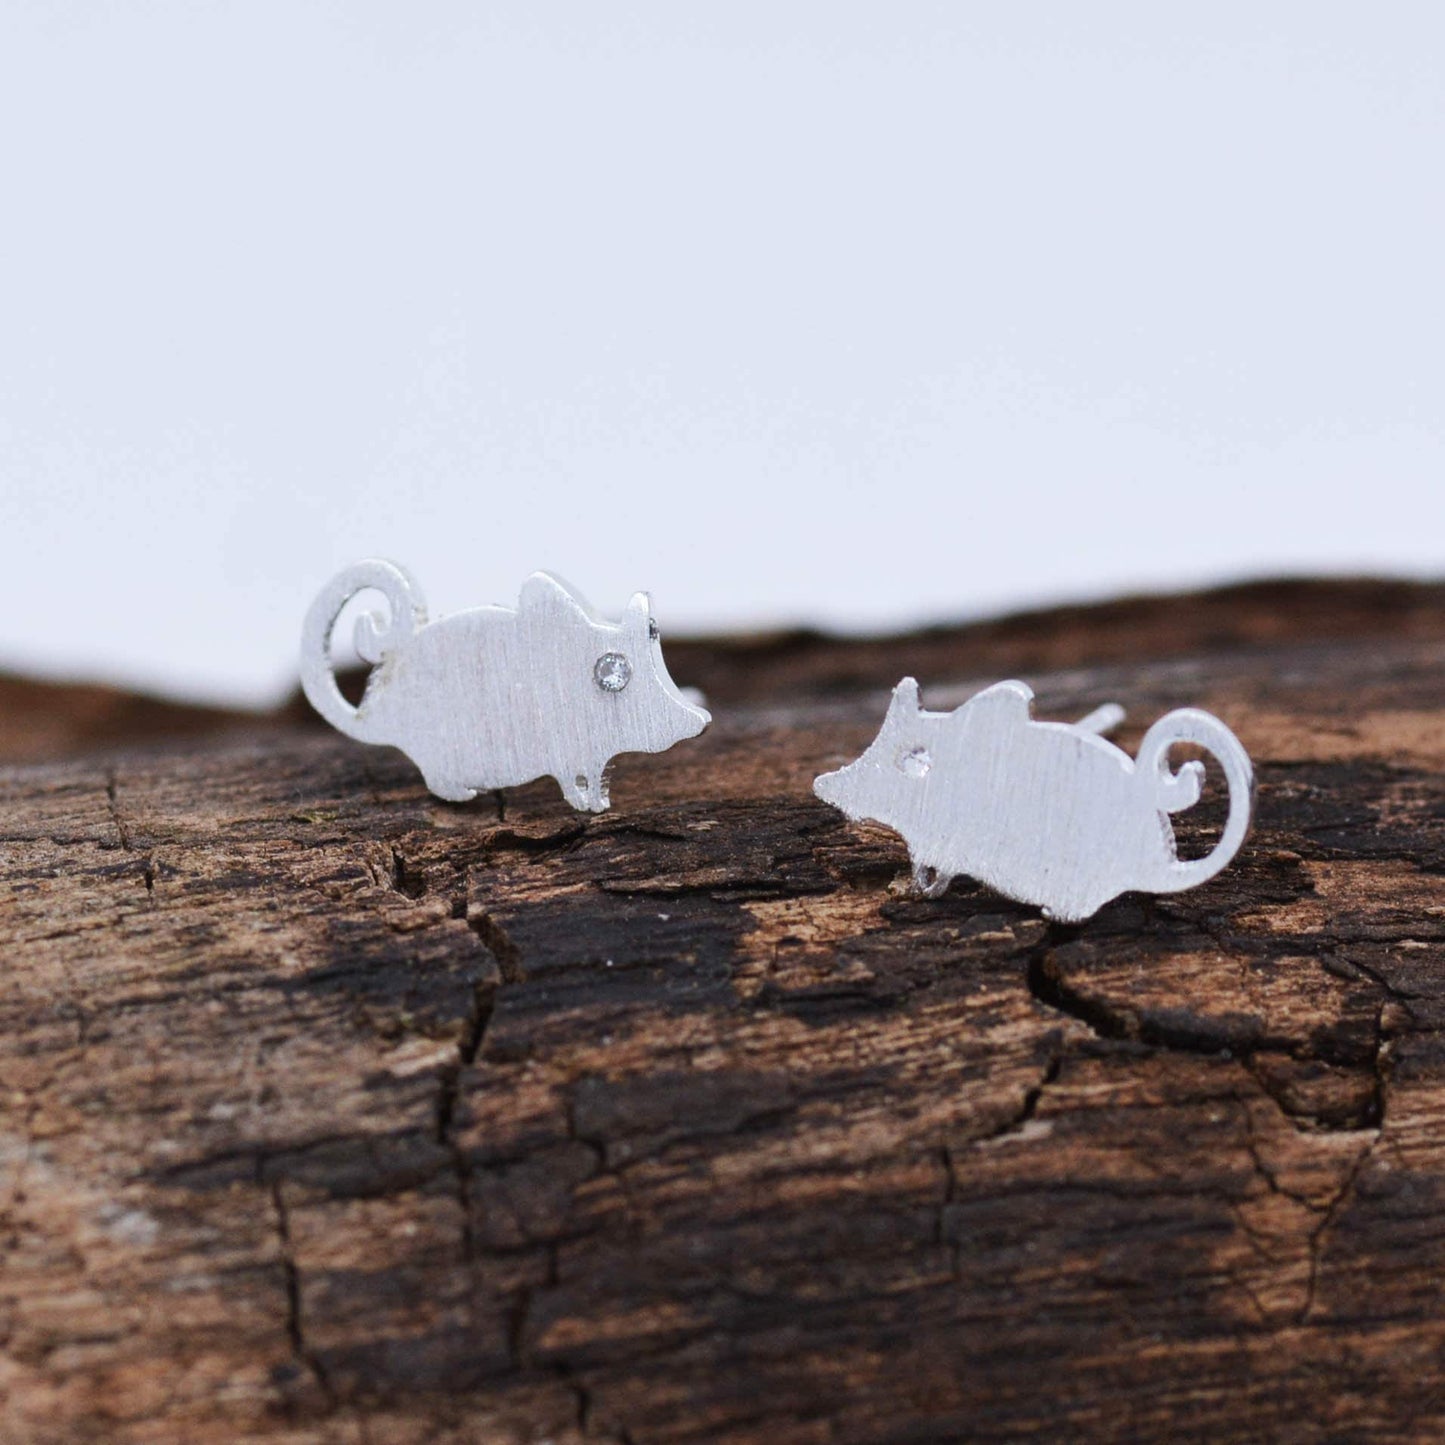 Super Cute Little Mouse Stud Earrings in Sterling Silver with CZ Crystals - Fun, Quirky and Whimsical Jewellery